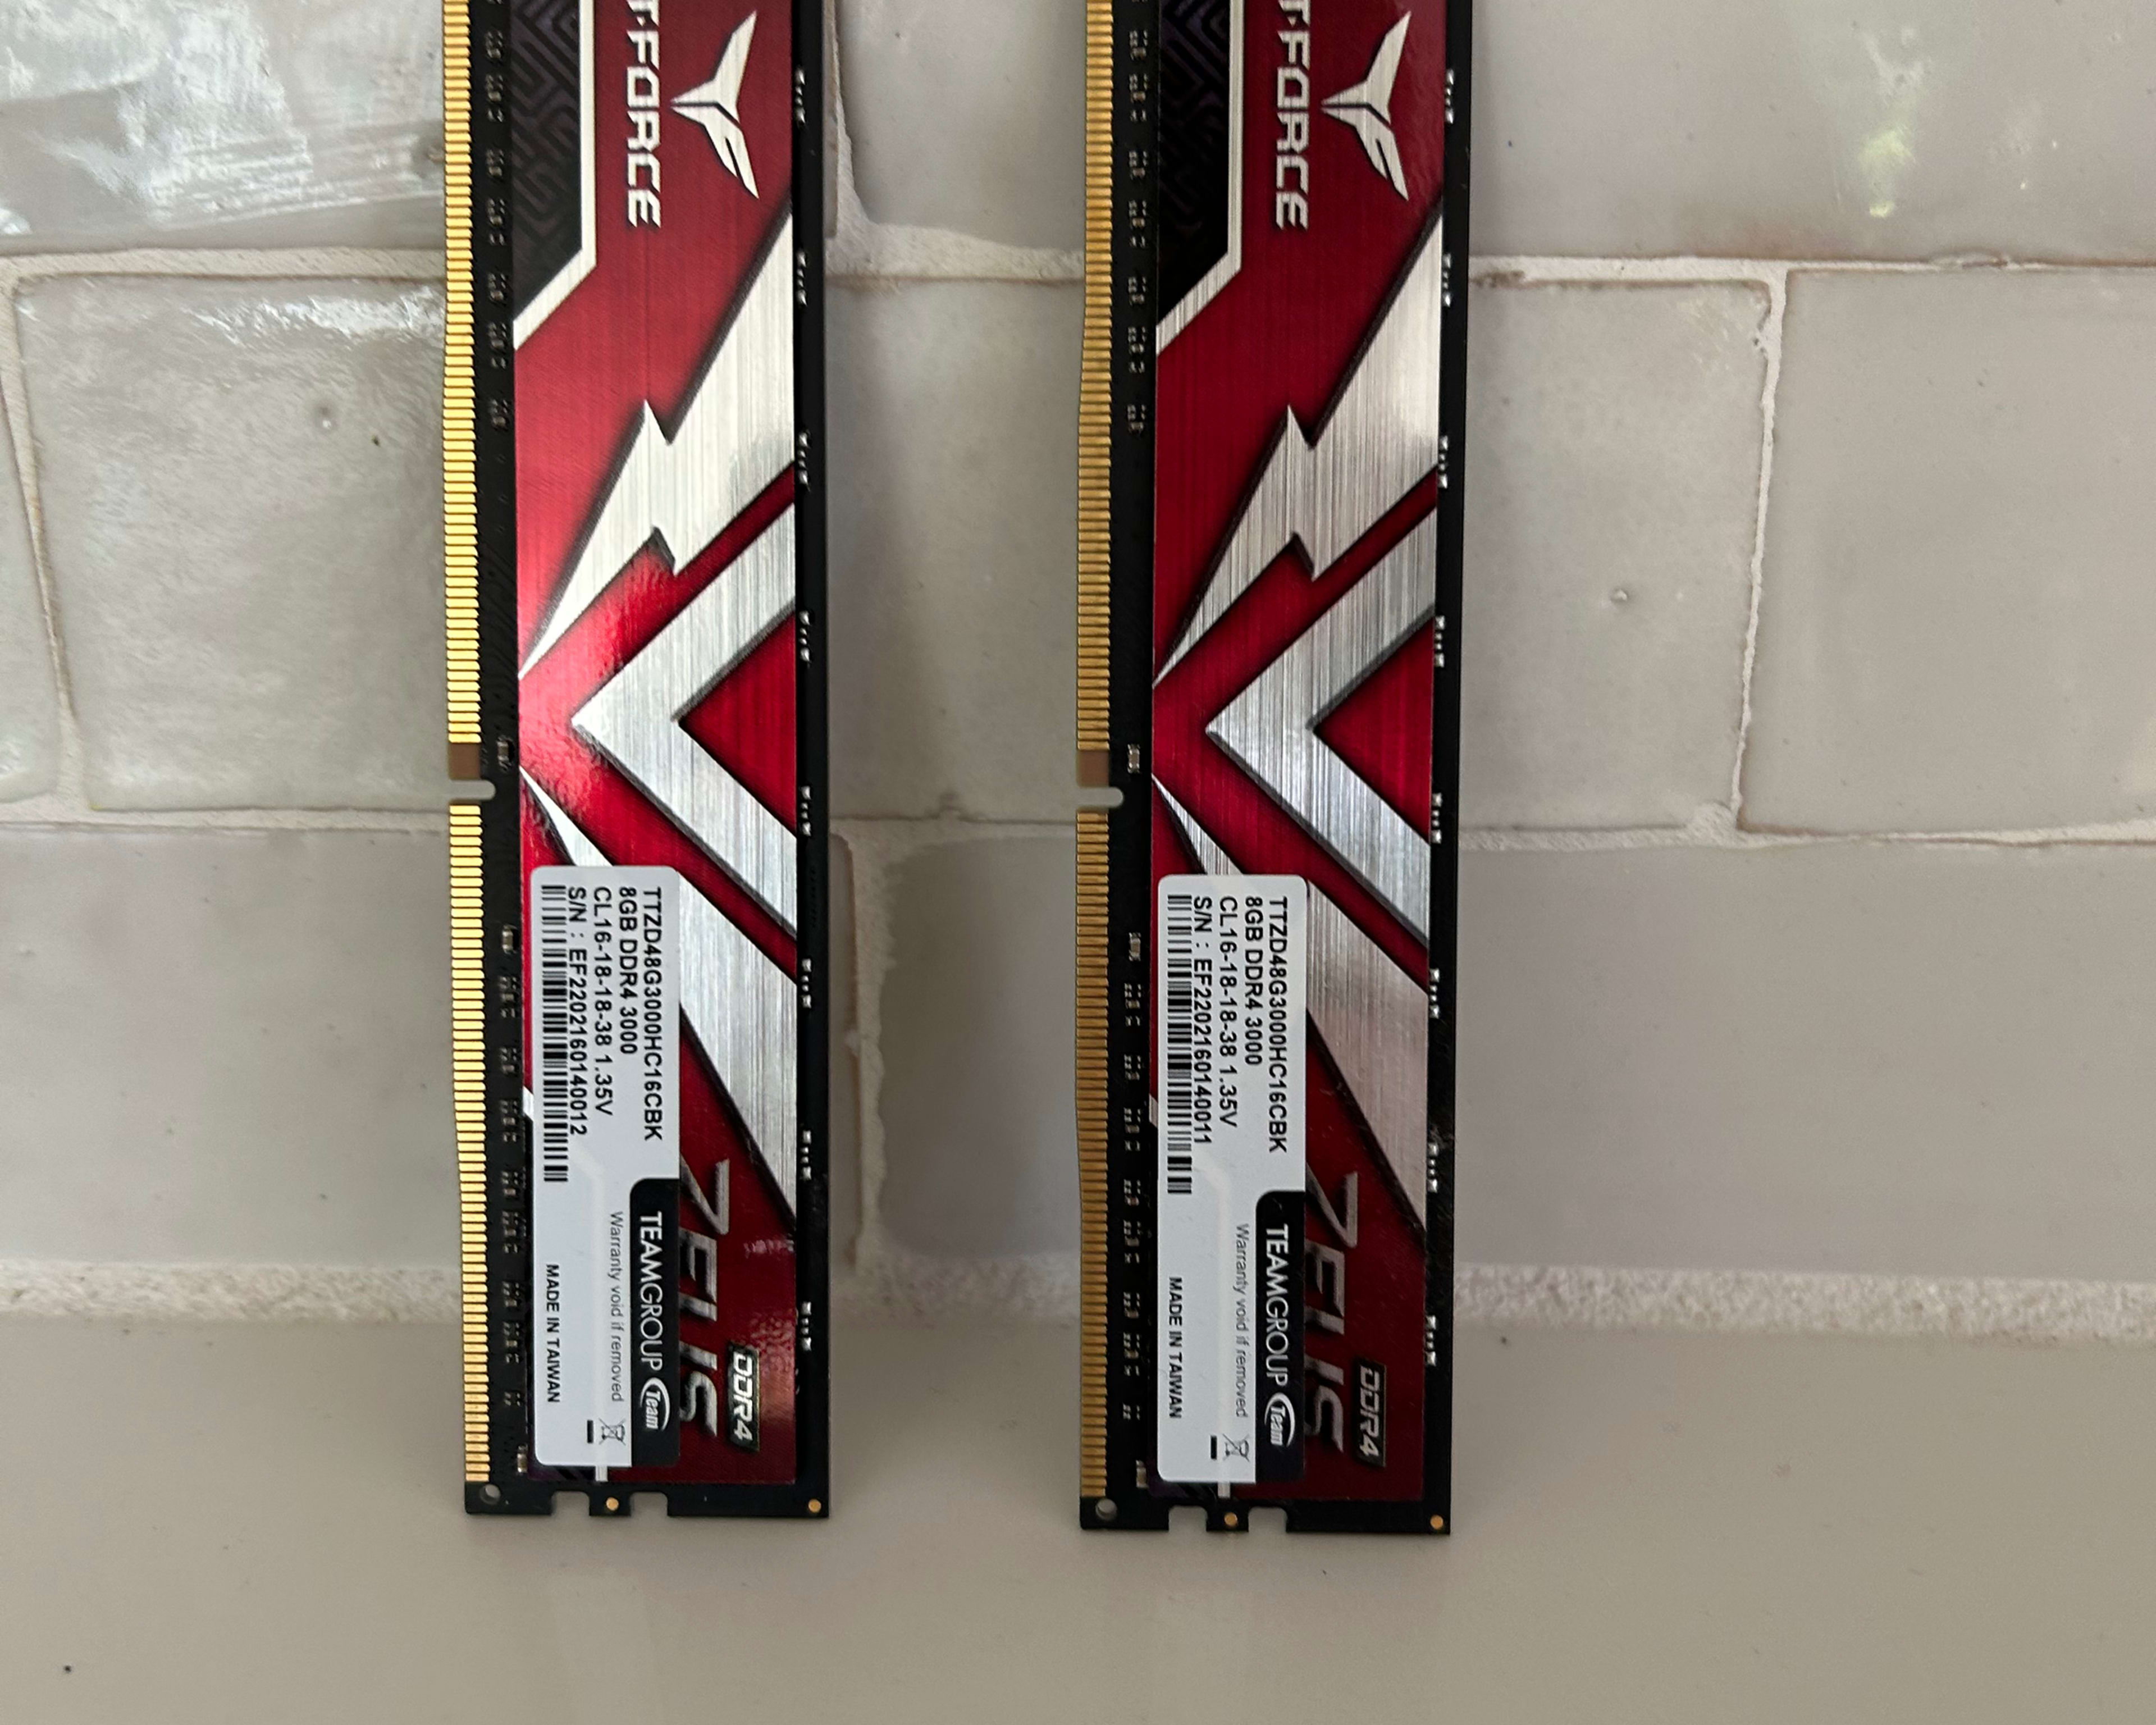 TEAMGROUP T-Force Zeus DDR4 16GB Kit (2 x 8GB) 3000MHz (PC4 24000) CL16 Desktop Gaming Memory Module